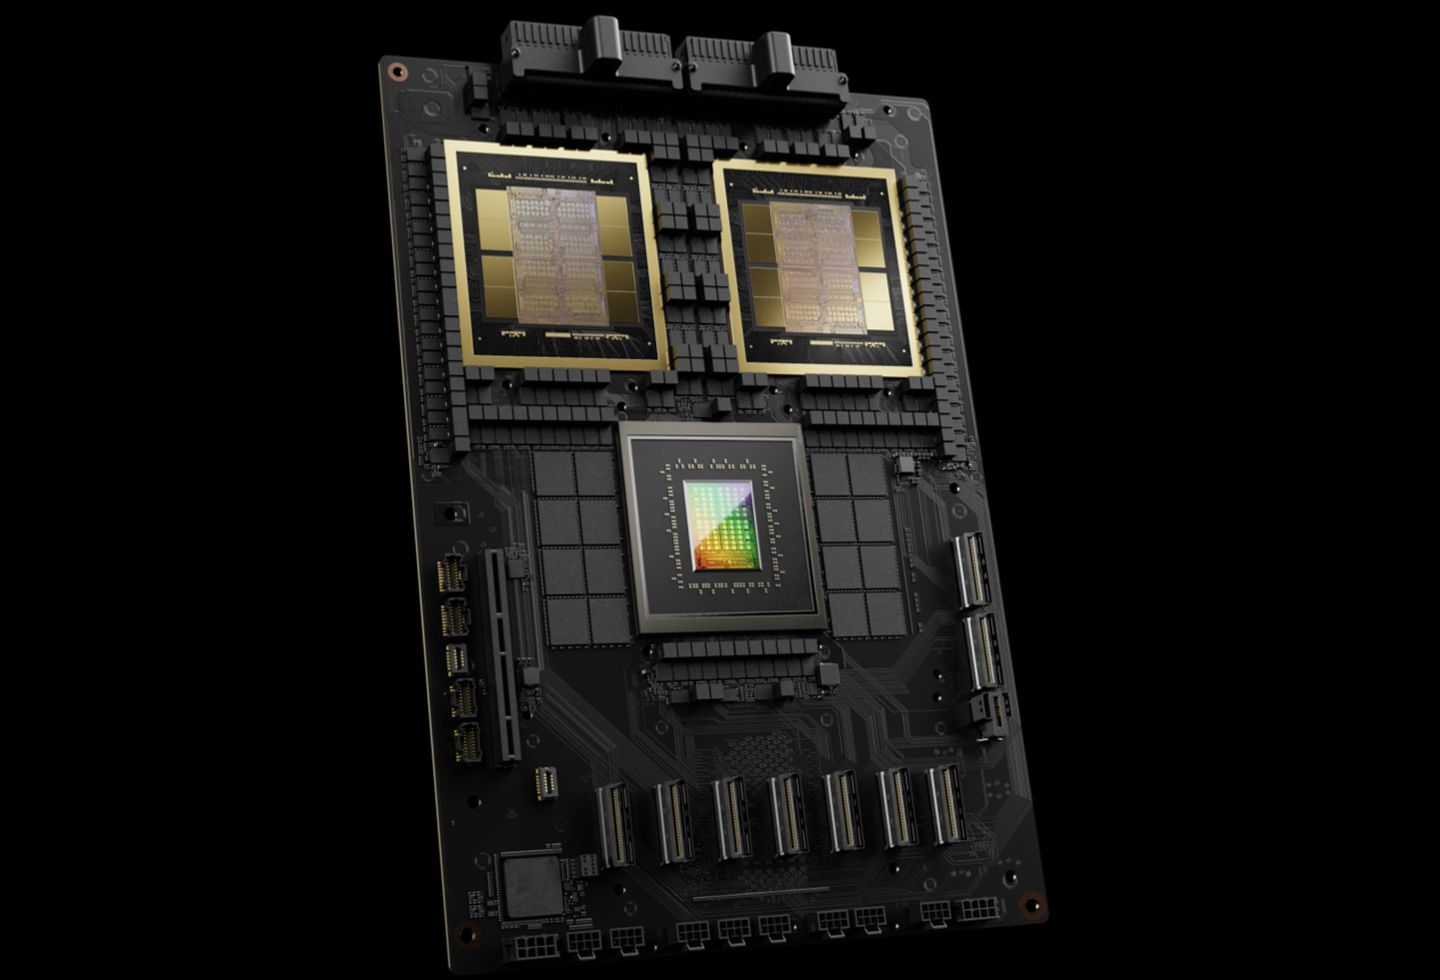 Here's what one GB200 looks like: Two GPUs, one CPU and one board; Source: Nvidia